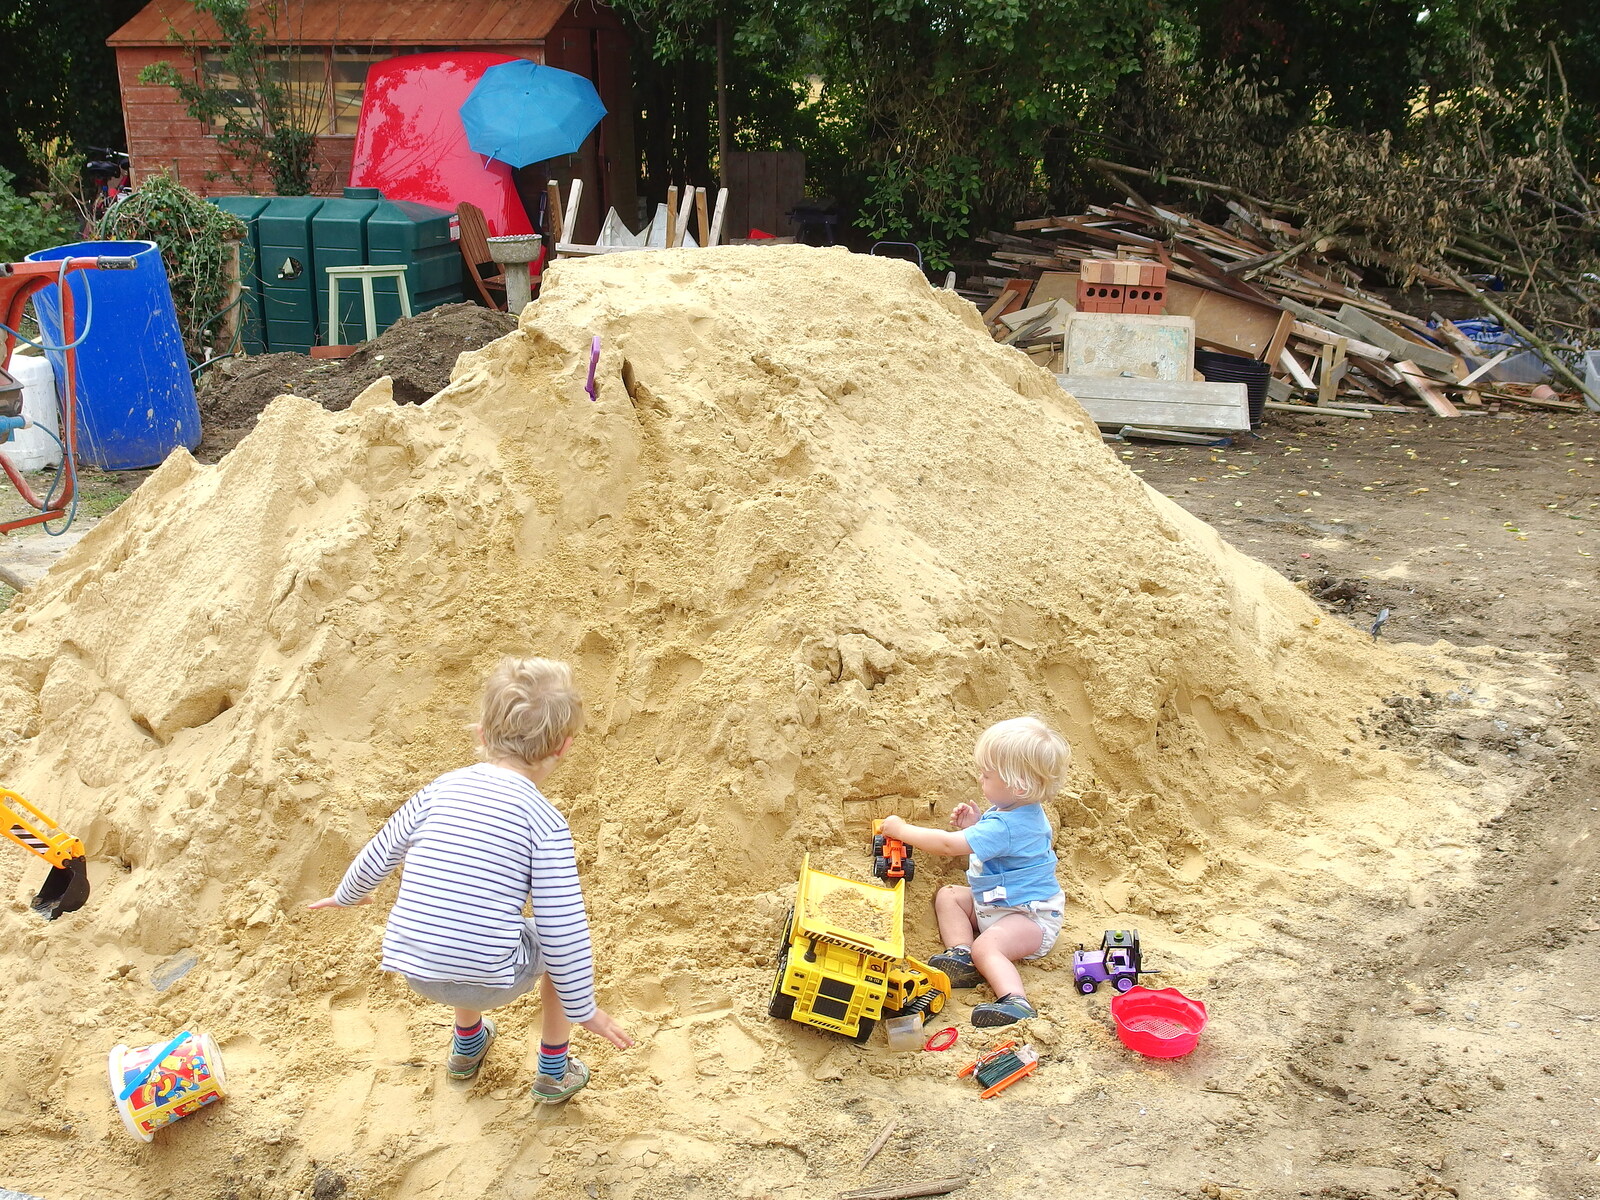 The boys and their big sand pile from A Giant Sand Pile, and a Walk at Thornham, Suffolk - 17th August 2013